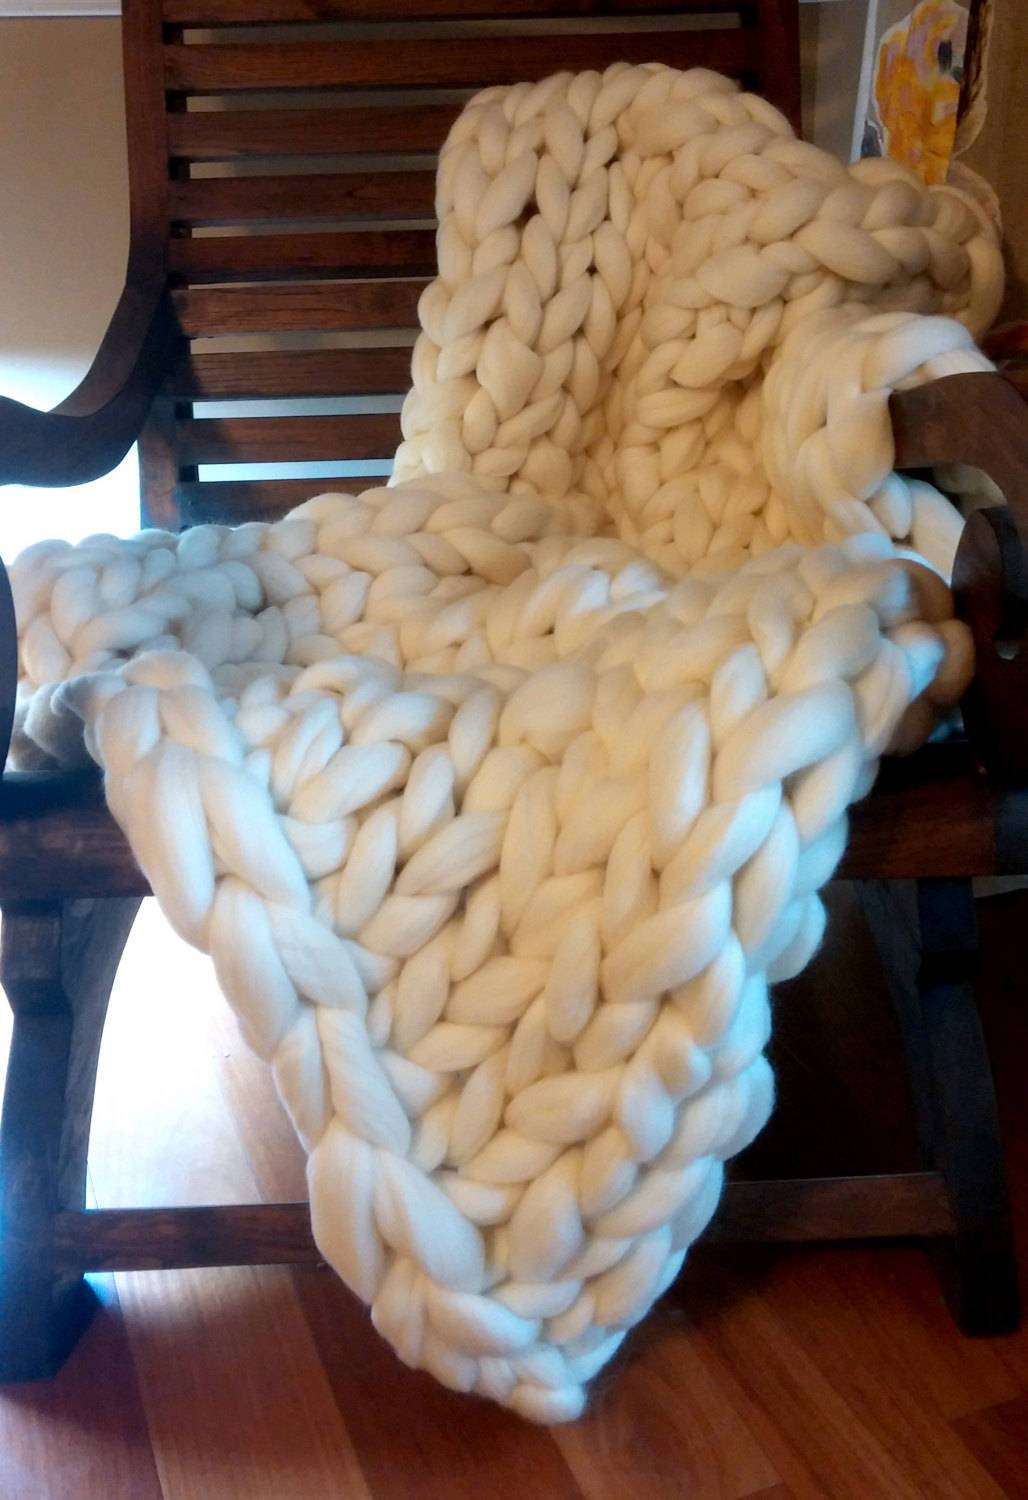 Last One! Chunky Knit Blanket Merino Wool 40" x 63" Throw Blanket Giant Knit, Extra Chunky Bulky Knit Blanket, Gift for her, Gift for mom